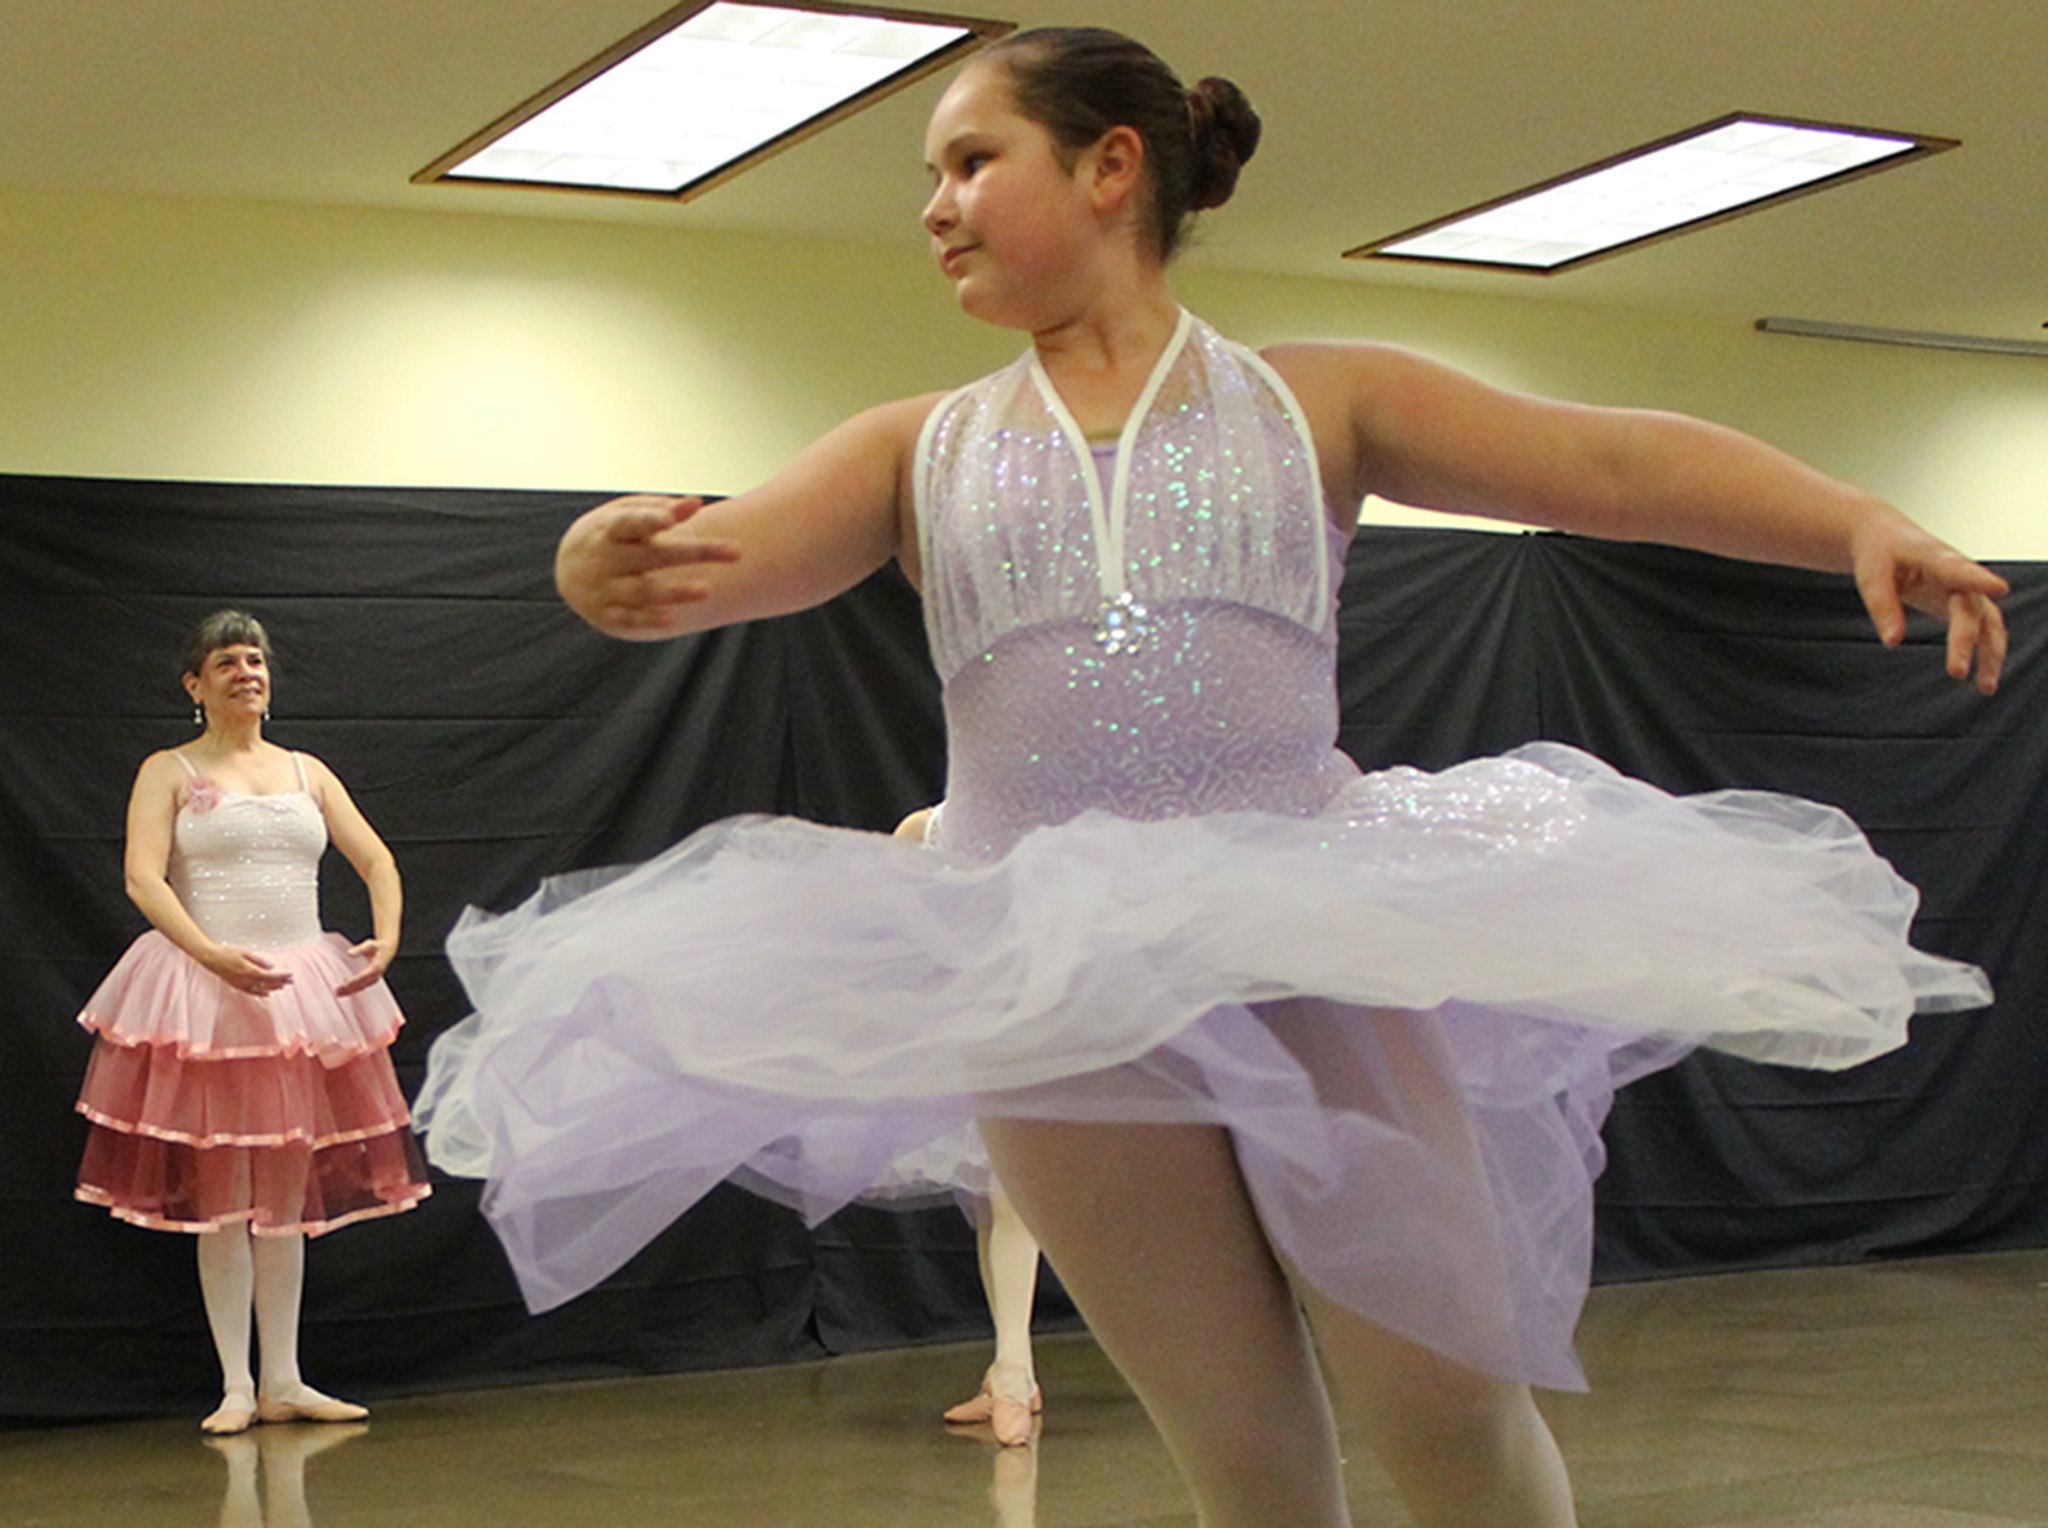 “Nutcracker” ballet offers its own Land of Sweets